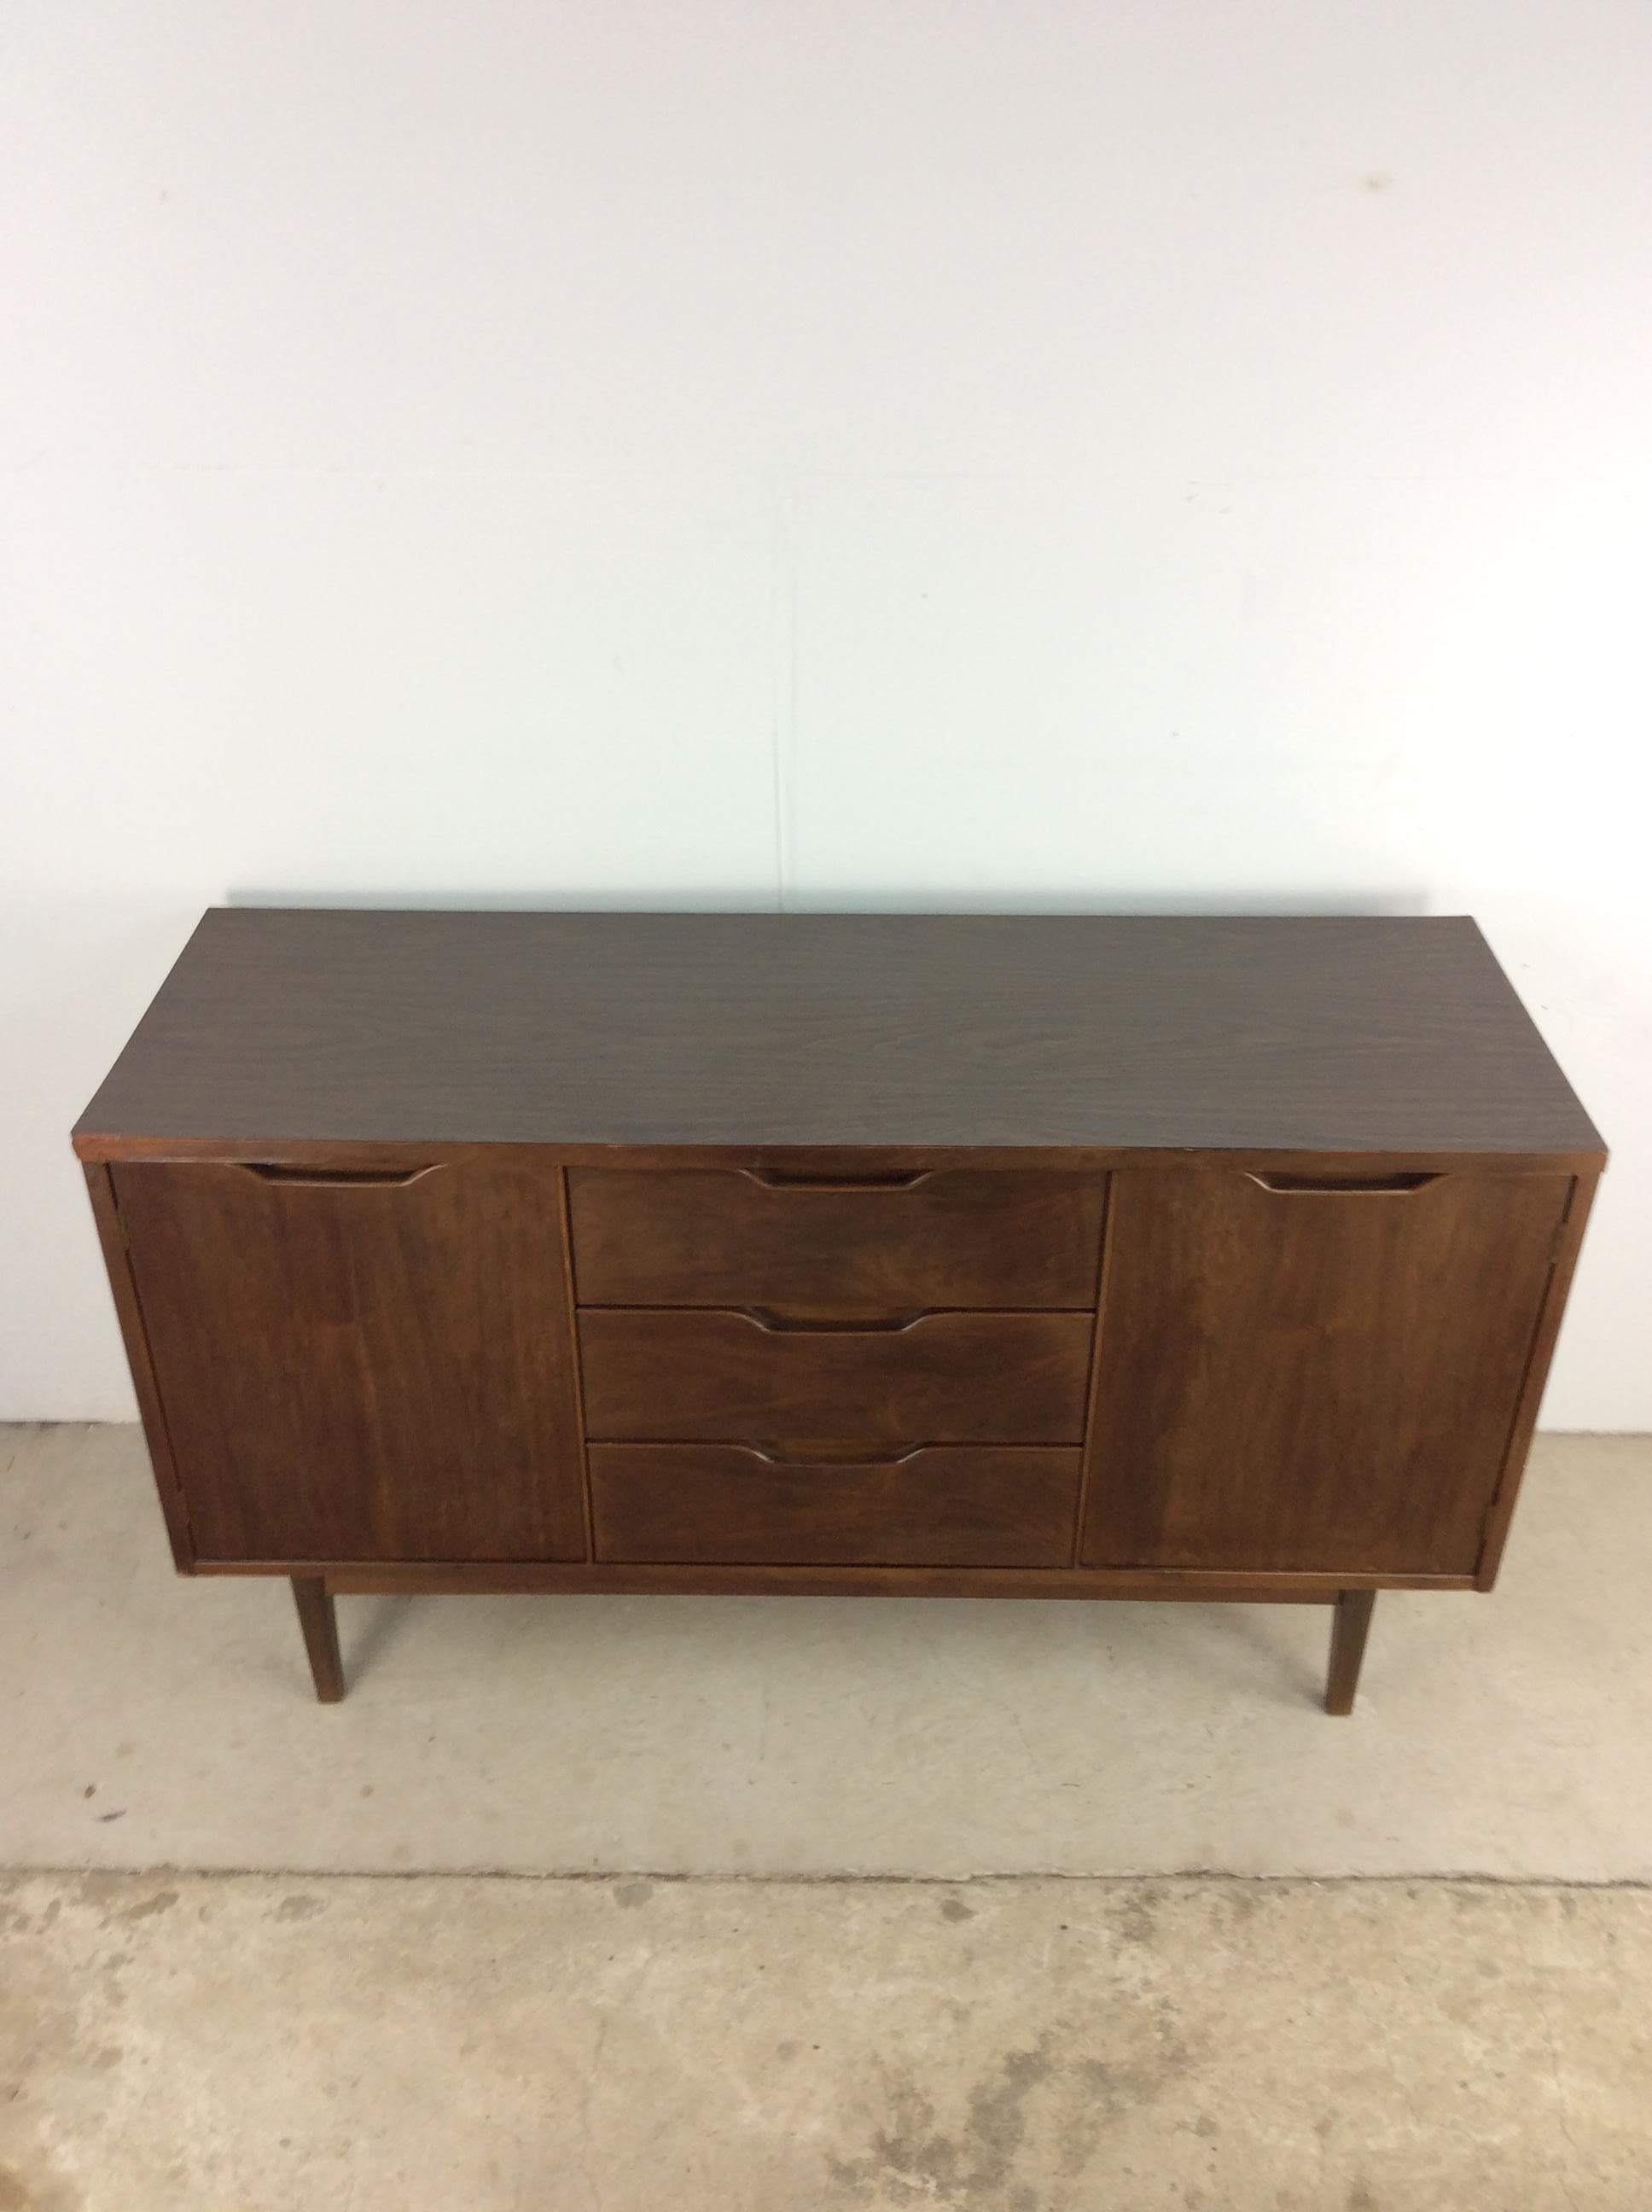 This mid century modern credenza by Stanley Furniture features hardwood construction, walnut veneer with original finish, durable formica top with faux woodgrain, three dovetailed drawers with carved wood pulls, two cabinets with single shelves and